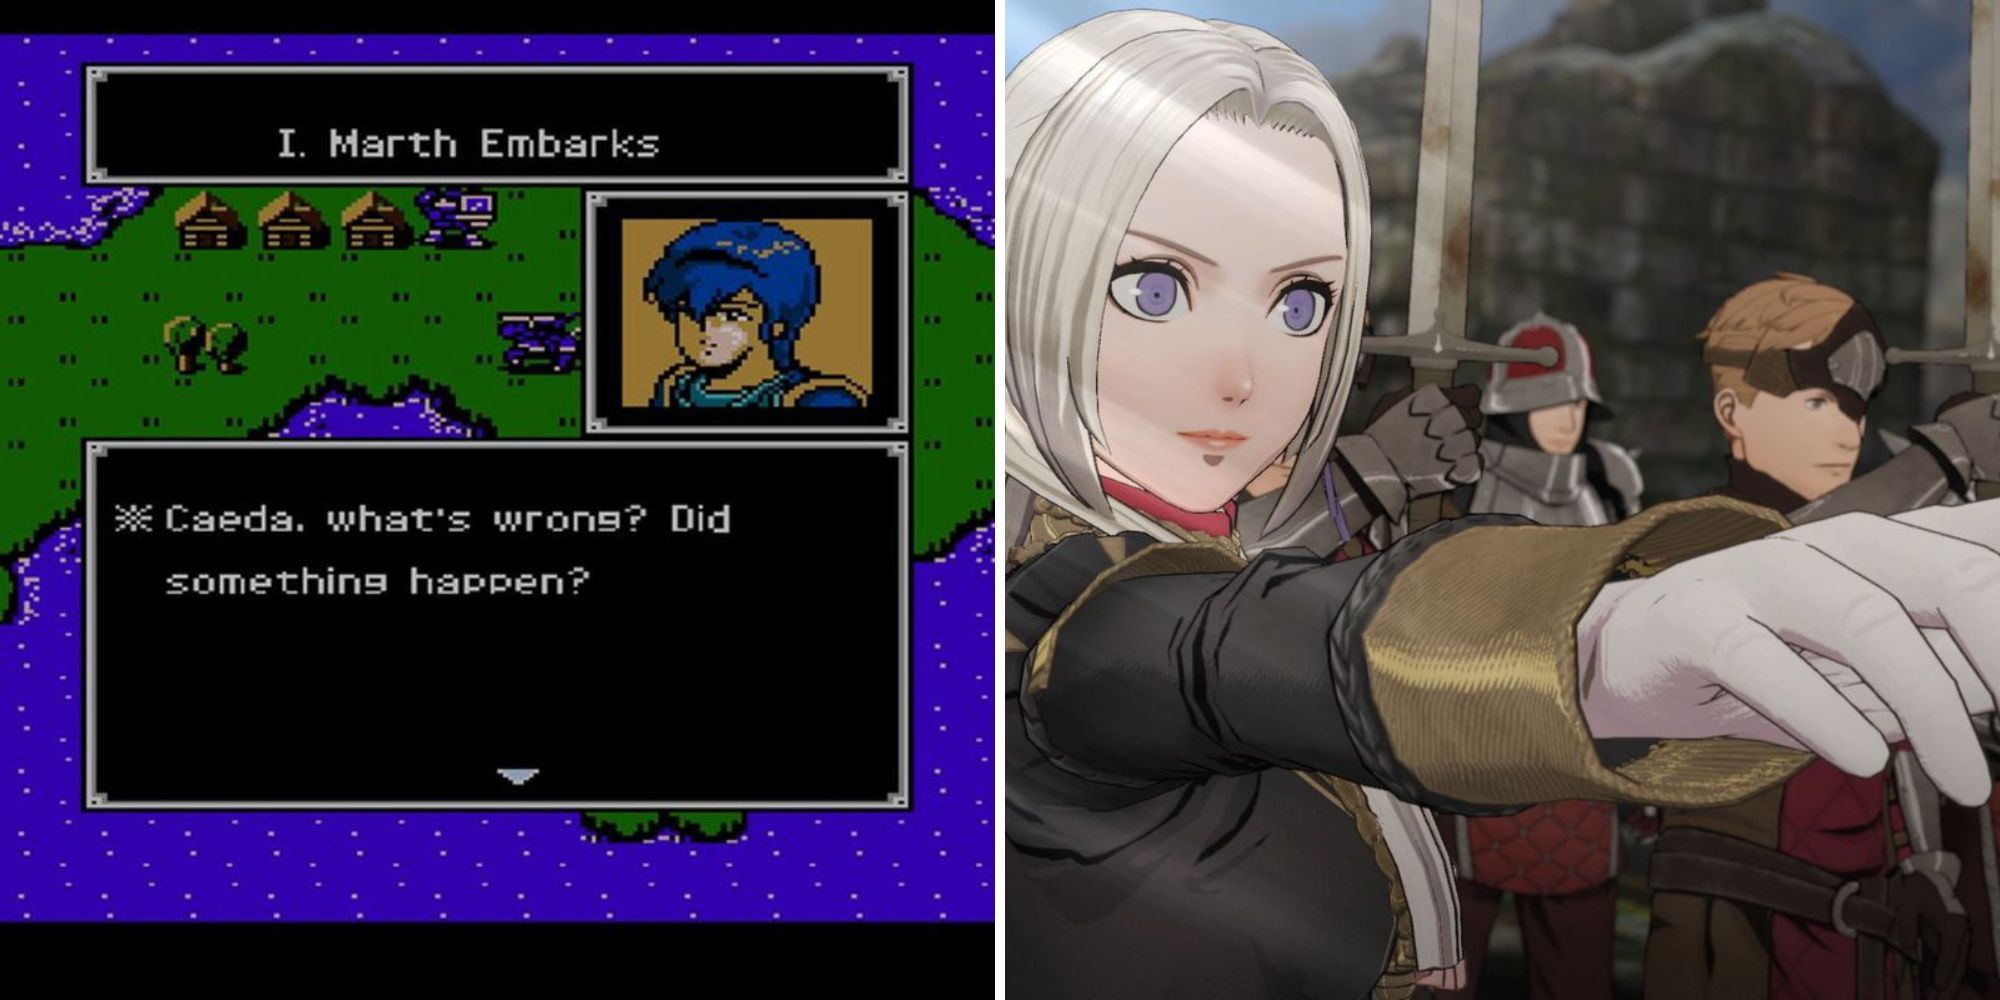 Gird showing the original Fire Emblem on the left and Fire Emblem Three Houses on the right